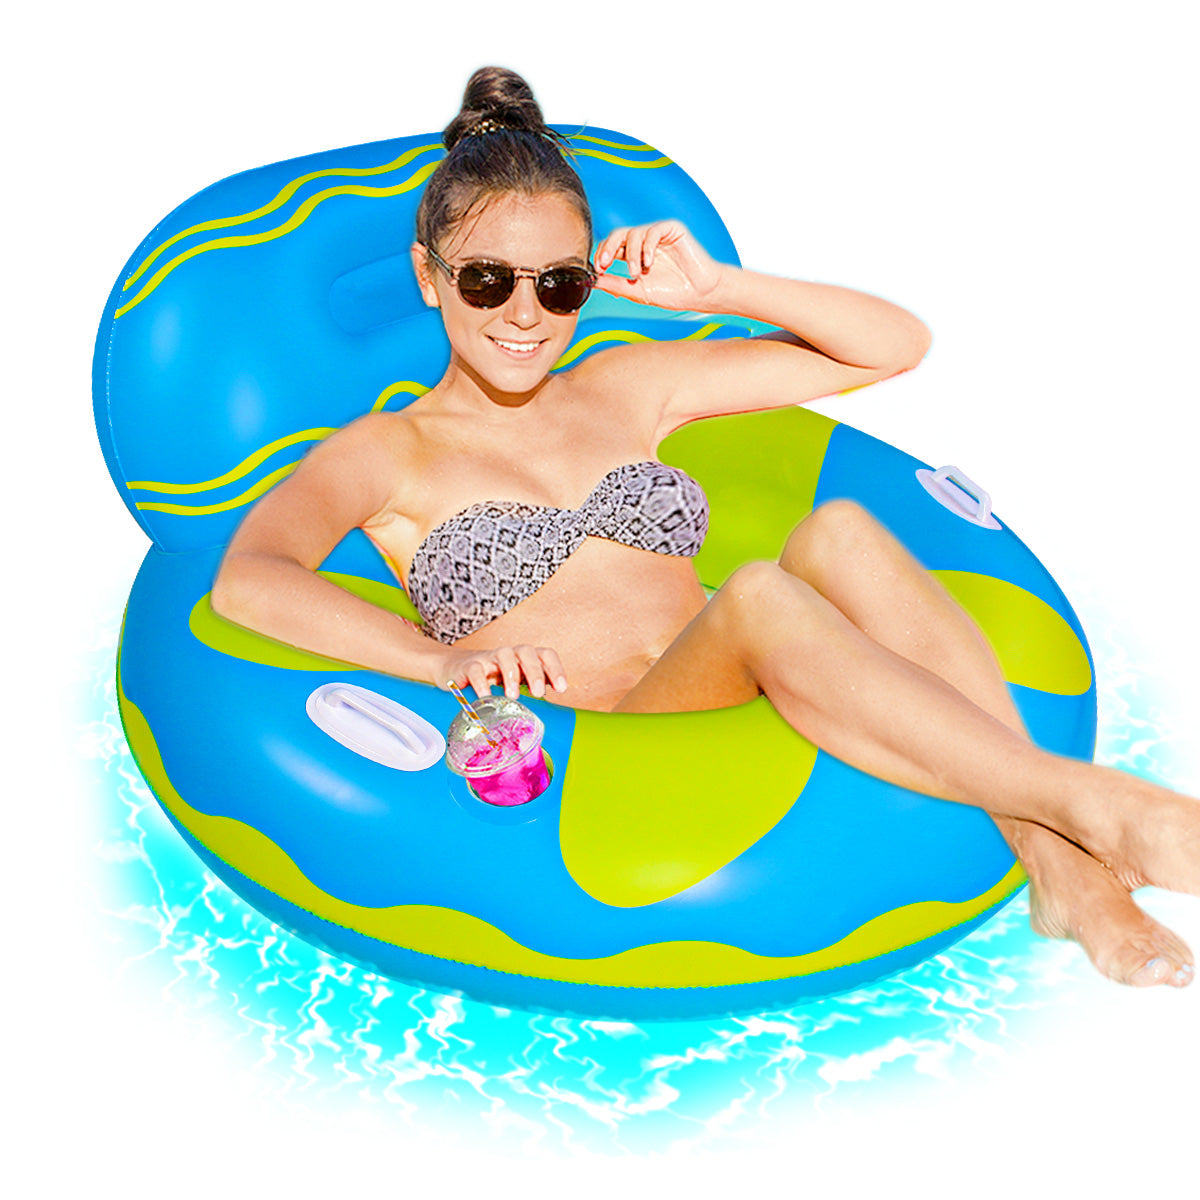 SKONYON Inflatable Swimming Pool Float for Adult, Pool Lounger Float with Cup Holder and Handles